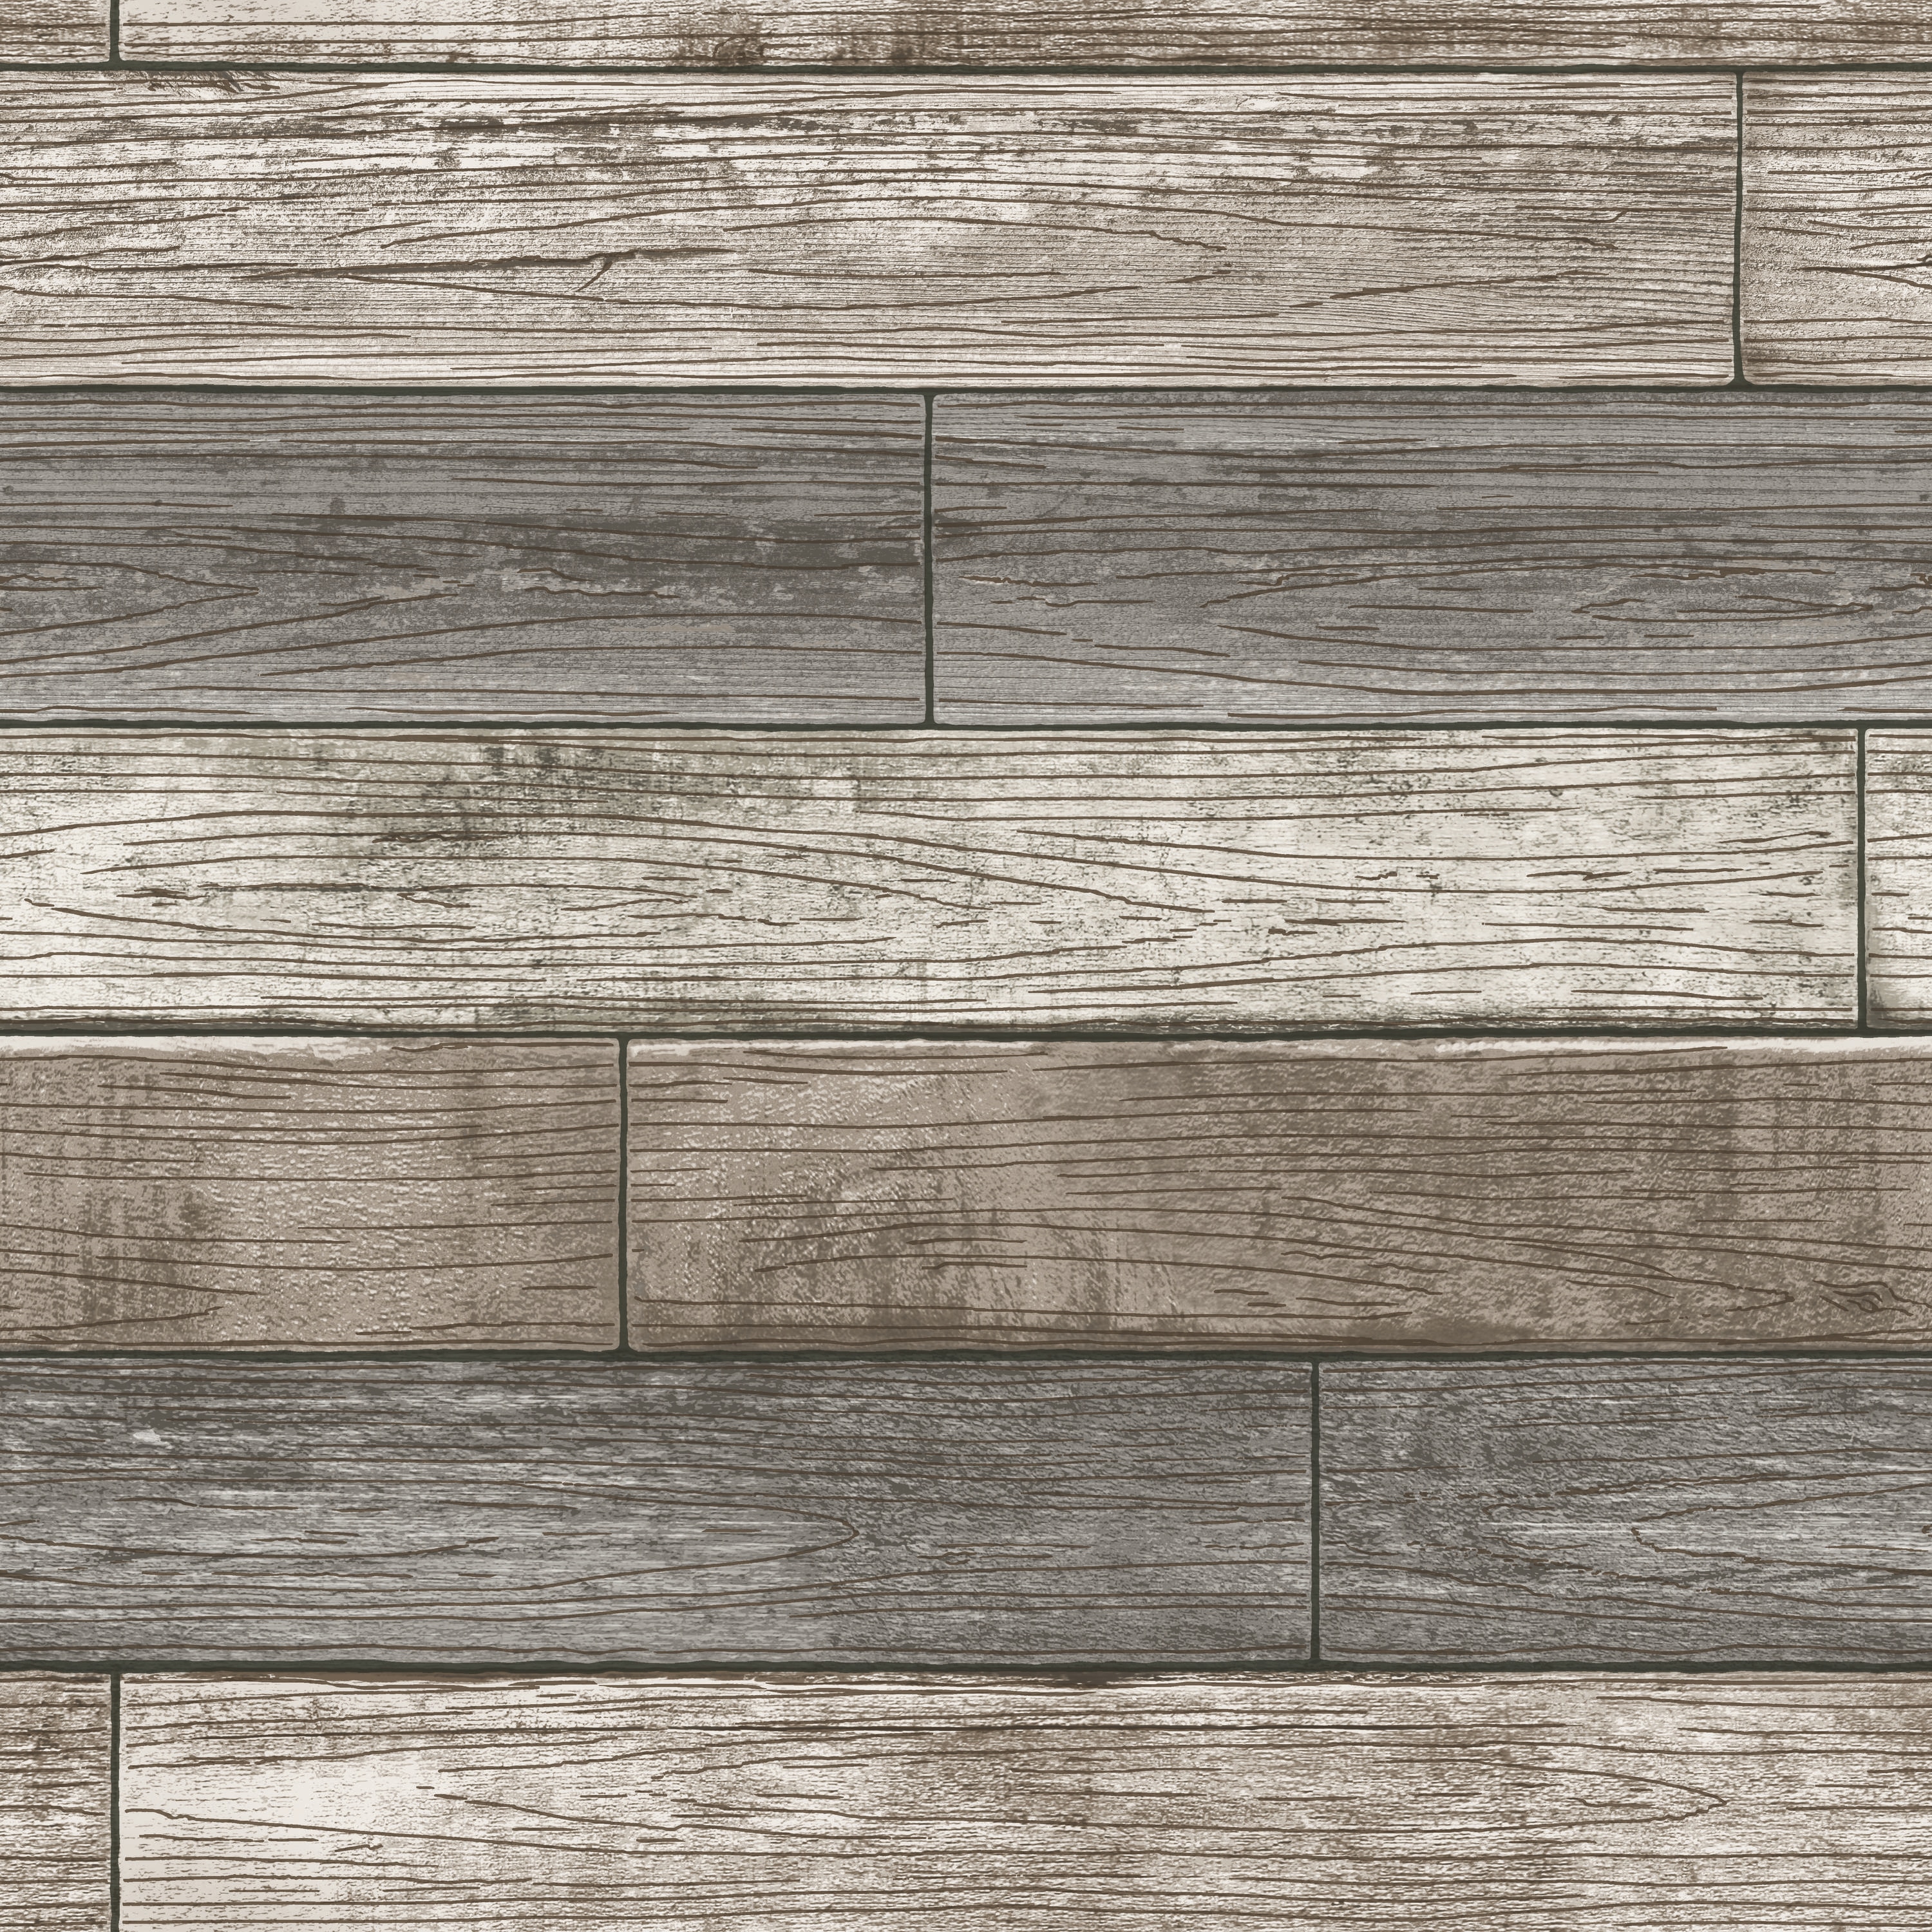 Sticker Brown Wood Planks as Background or Texture, Natural Pattern 